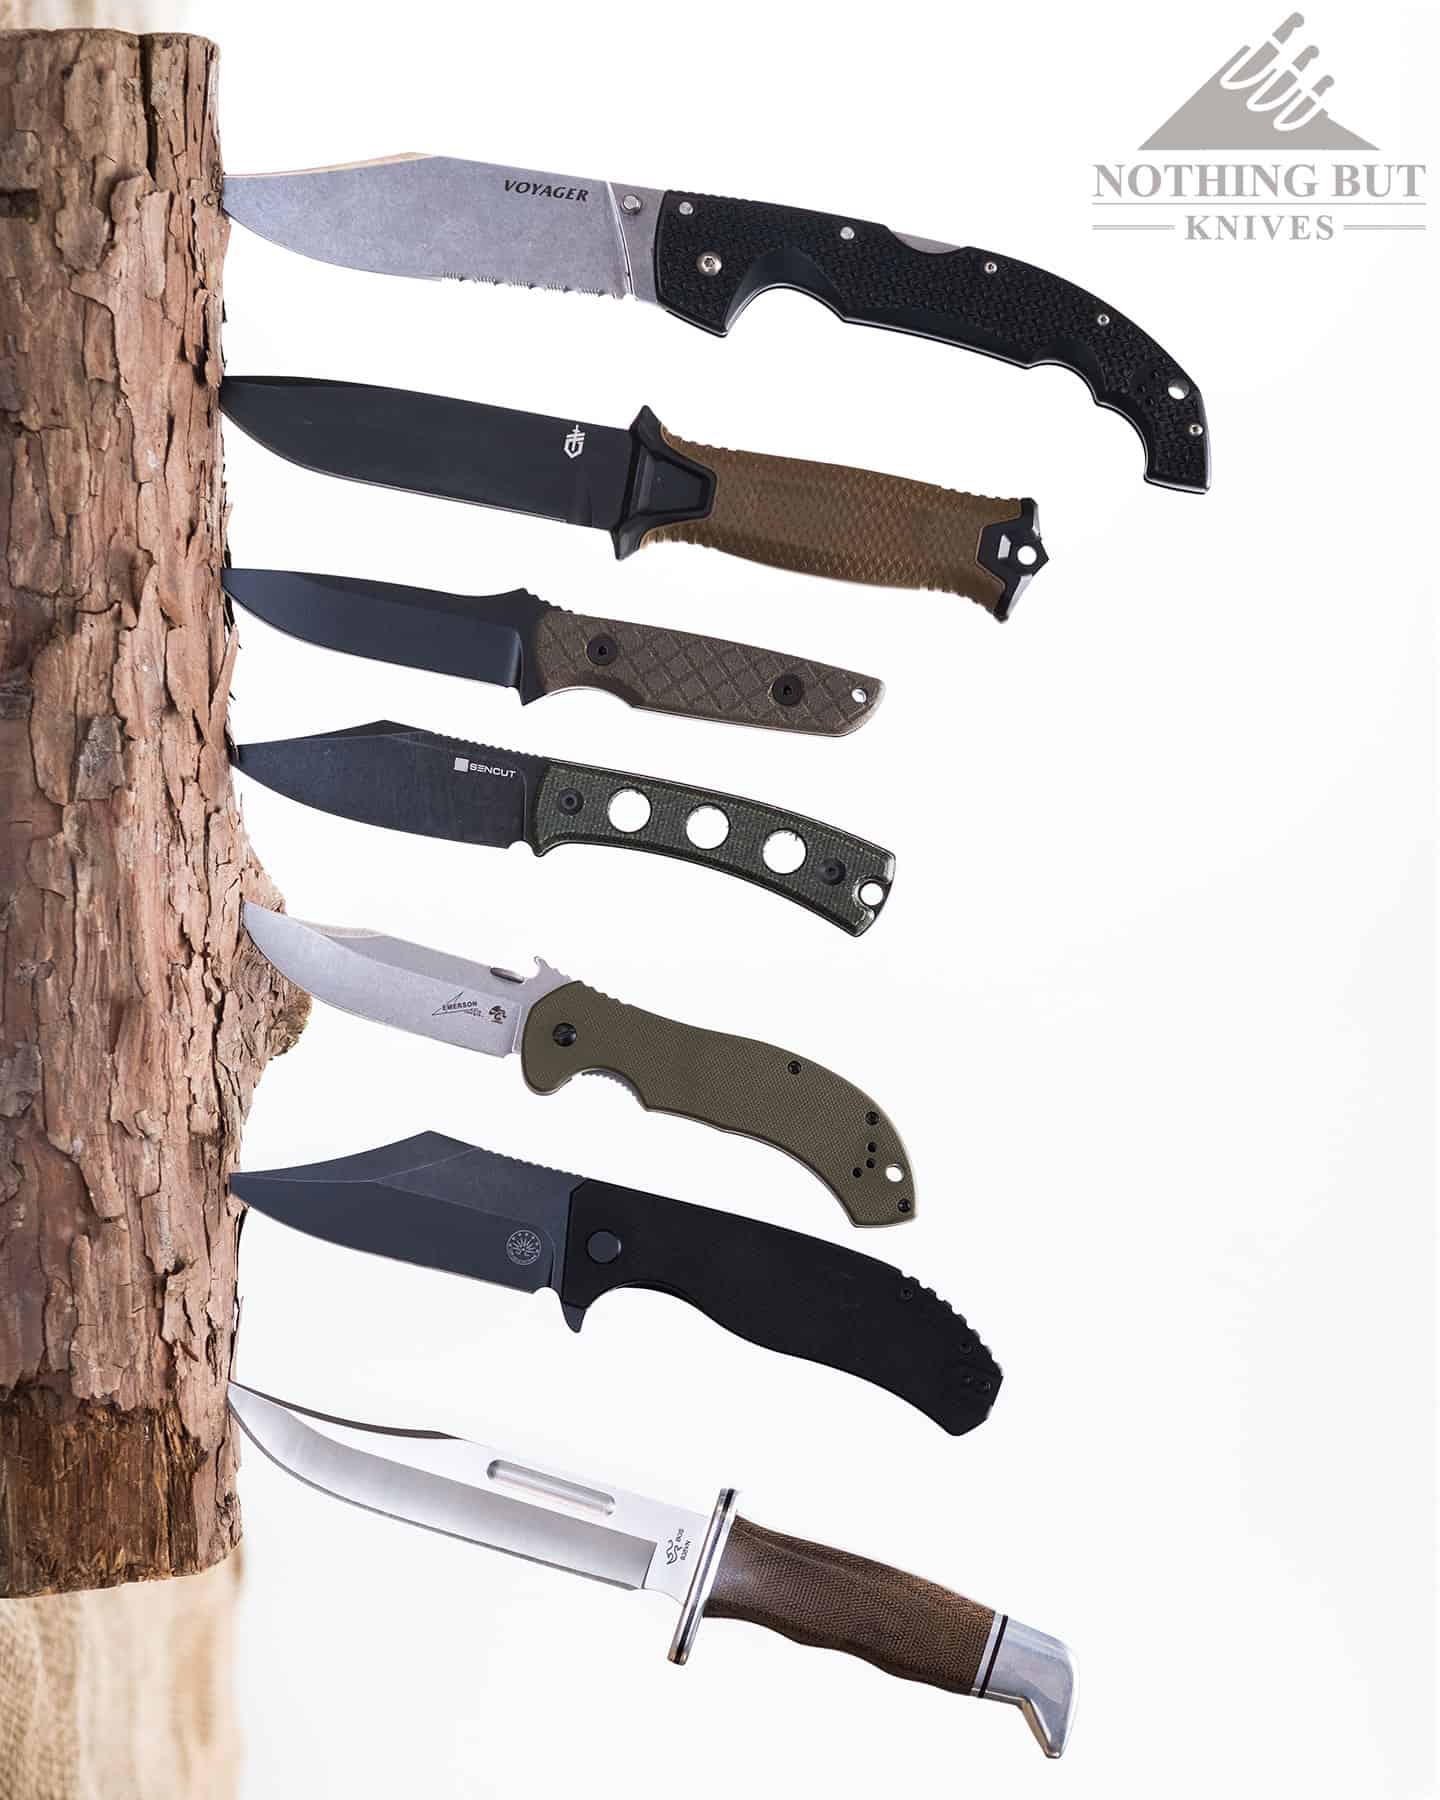 https://www.nothingbutknives.com/wp-content/uploads/2022/07/Best-Tactical-Knives-From-Our-Favorite-Brands.jpg